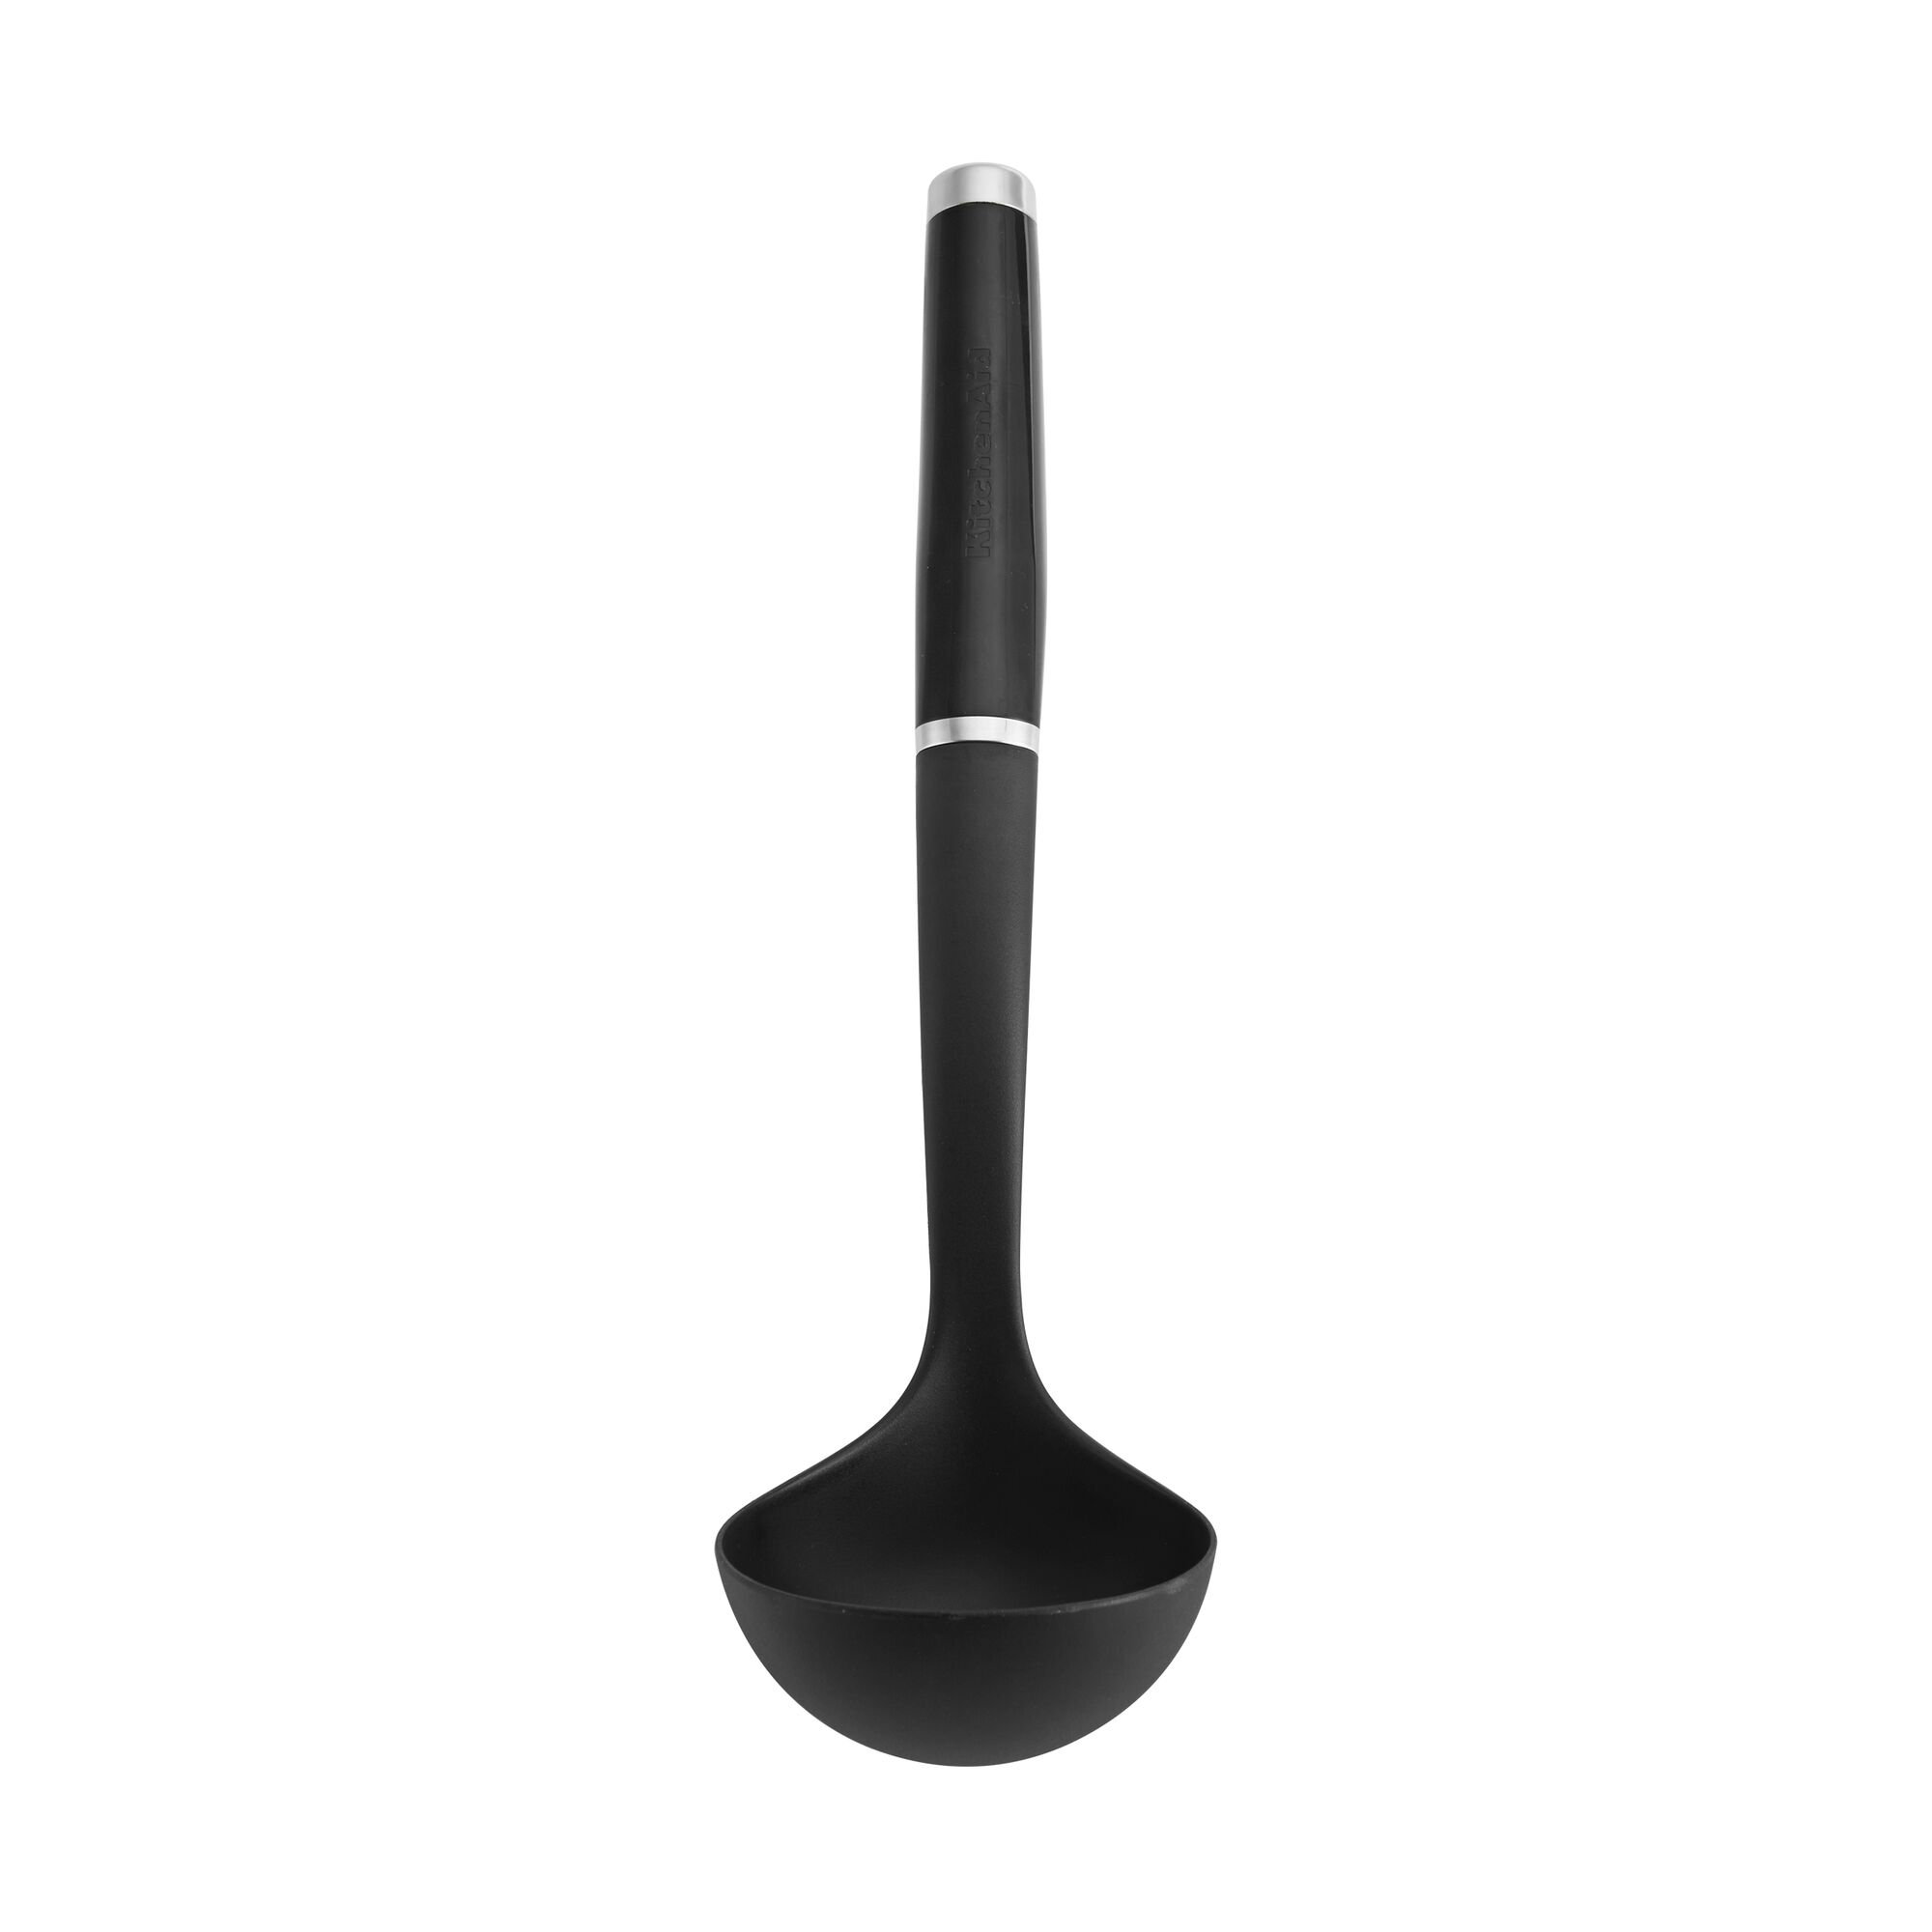 KitchenAid Silicone Tipped Stainless Steel Tongs, 10.26 Inch, Black